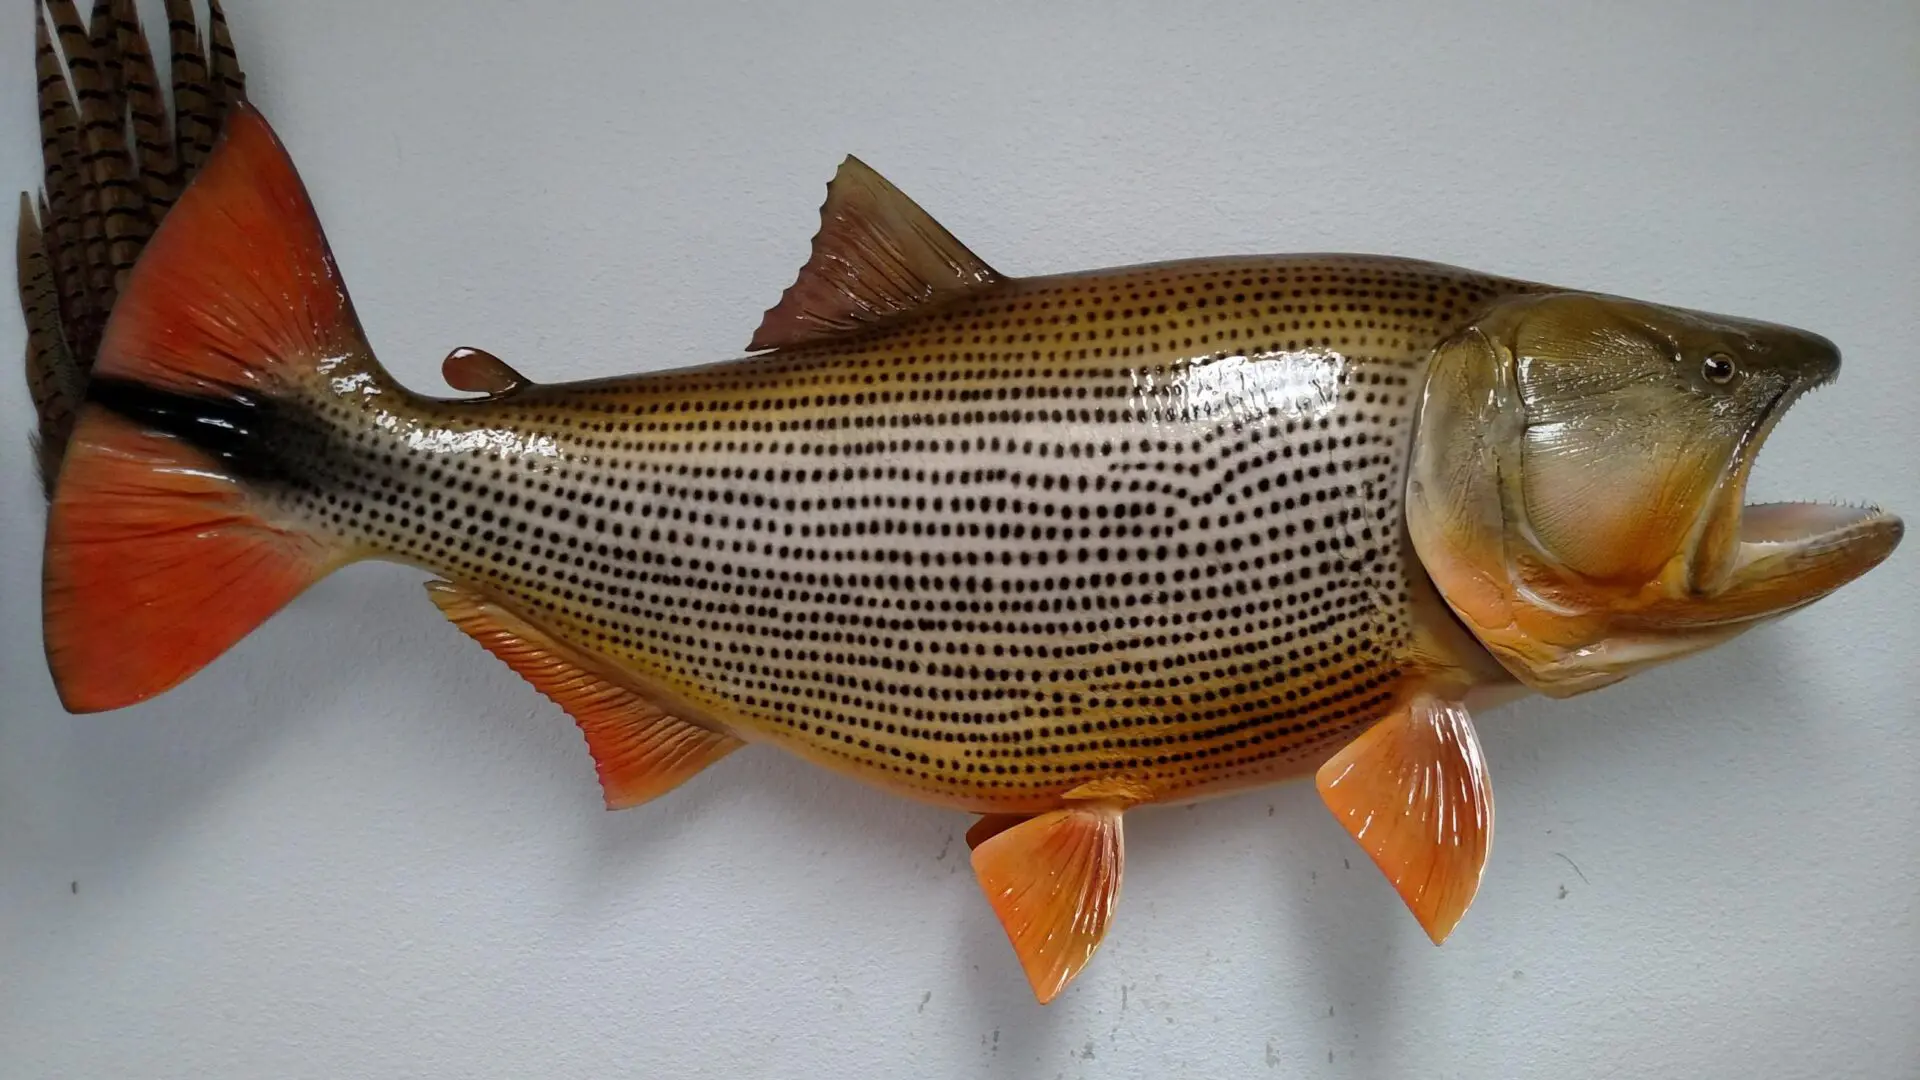 A colorful fish taxidermy available for sale